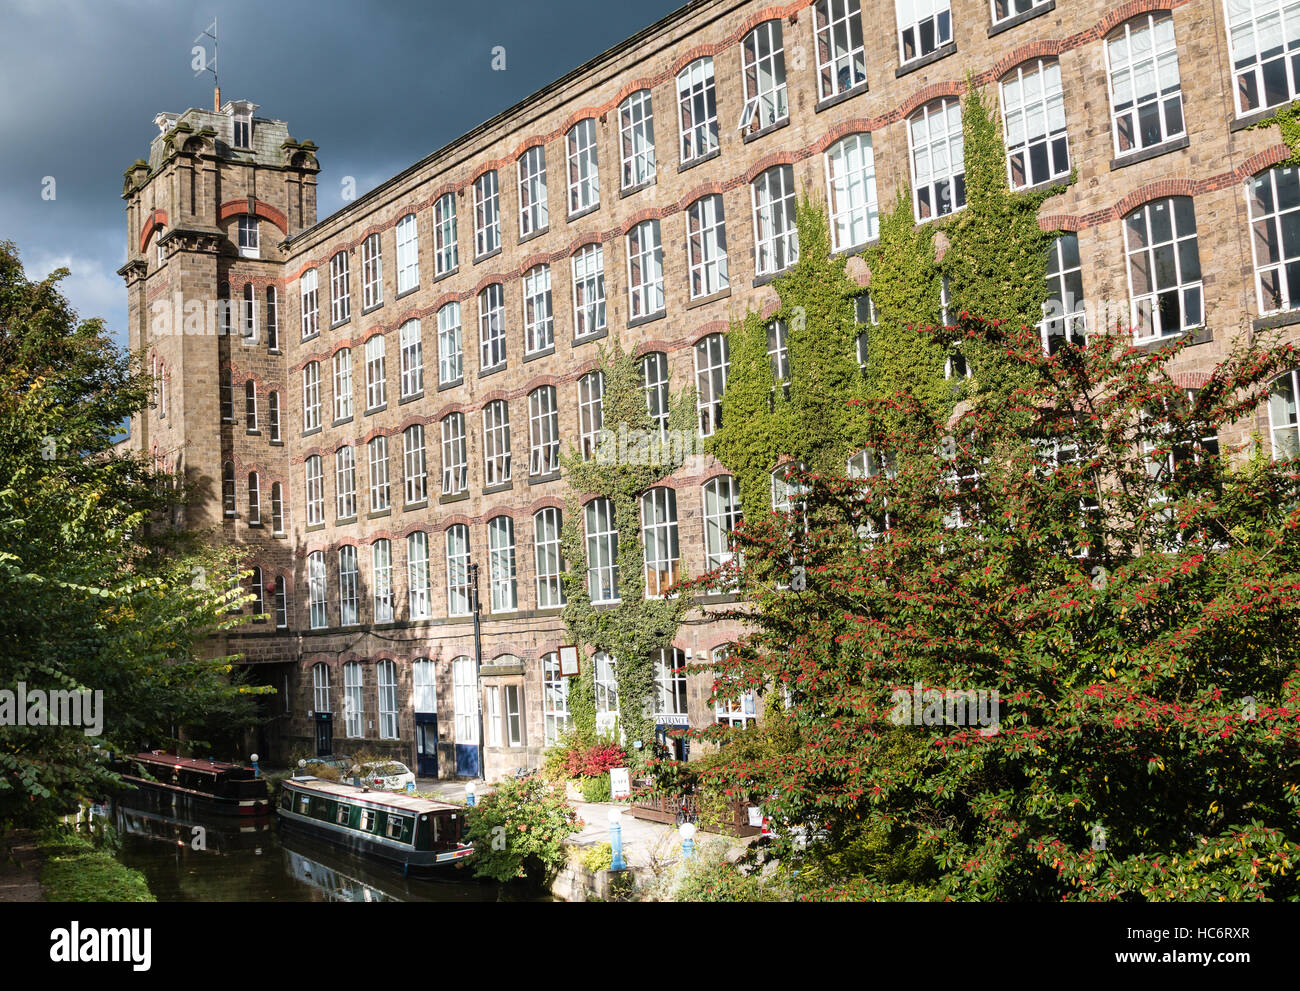 Clarence MIll in Bollington Cheshire.  The old textile mill is next to the Macclesfield Canal and is now used for office space Stock Photo